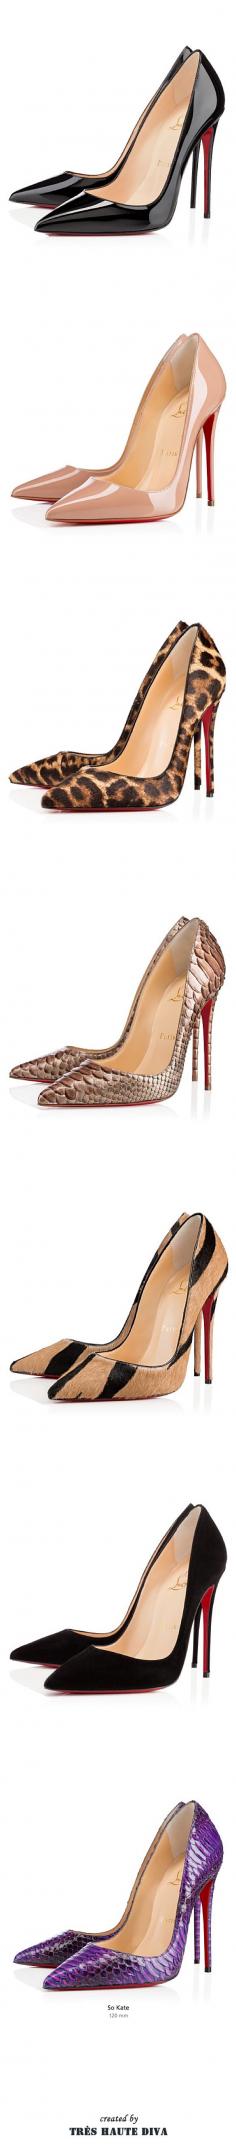 Christian Louboutin Boots #Christian #Louboutin #Boots, Wholesale Christian Louboutin Shoes Only $115，Christian Louboutin Shoes is on clearance sale,the world lowest price. The best Christmas gift